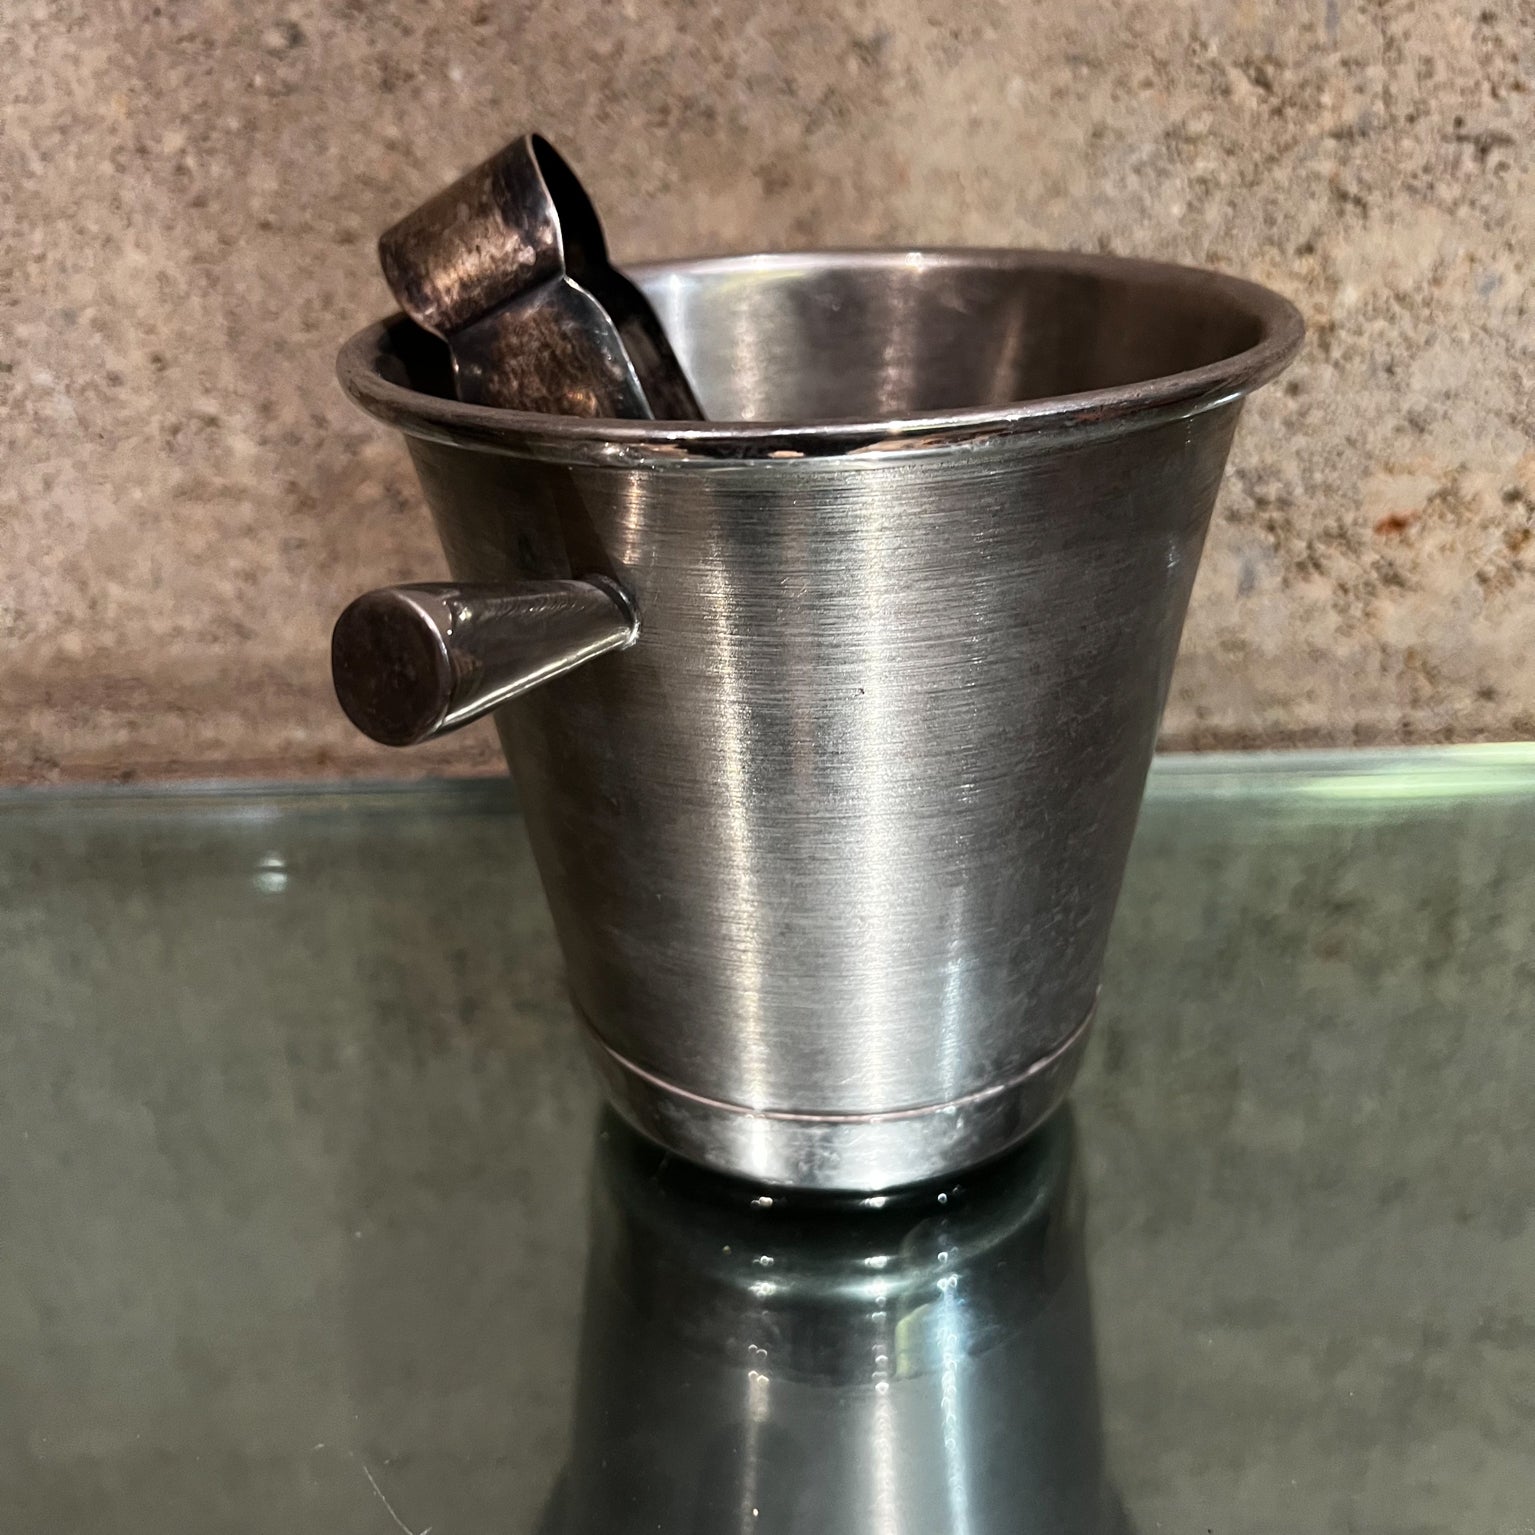 Modernism by Genesis vintage silverplate ice bucket & tongs from Mexico
Ice bucket 5 tall x 5.5 diameter x 8 w Tongs 1 tall x 2.5 w x 6.5 d
Vintage ice bucket, silver plated with original vintage patina throughout.
Selling as original vintage